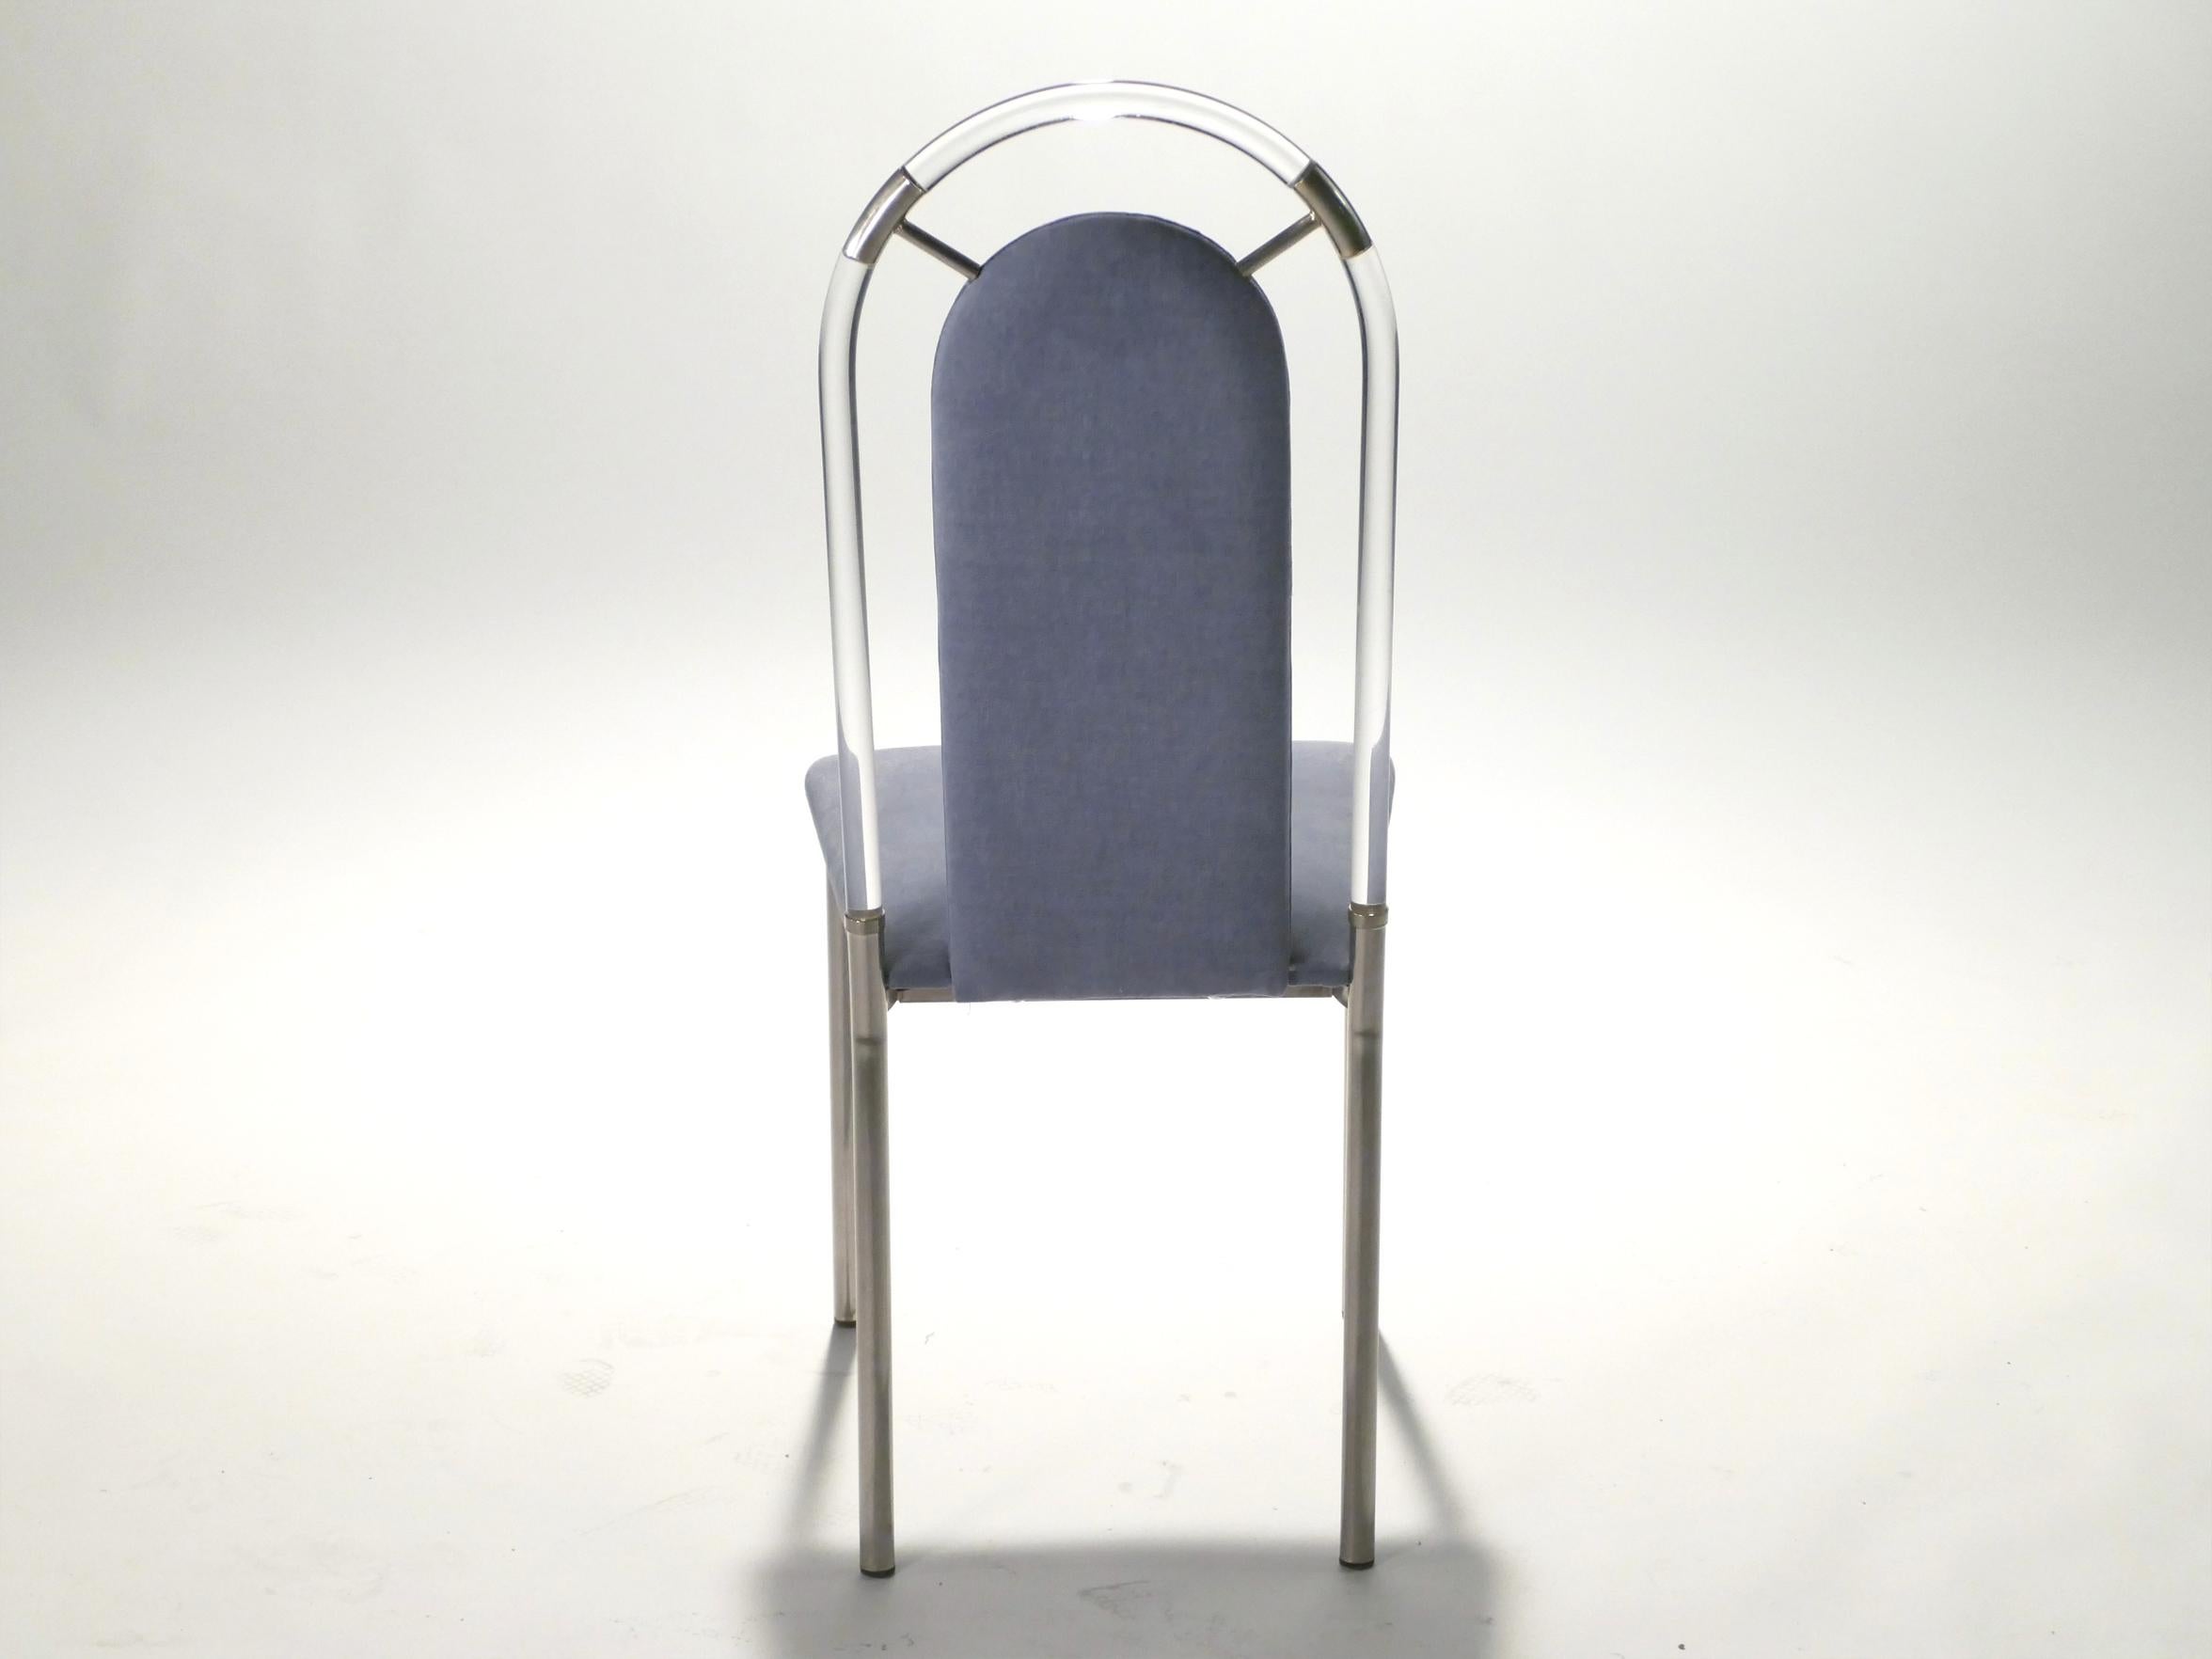 French Pair of Lucite and Gunmetal Chairs by Maison Jansen, 1970s